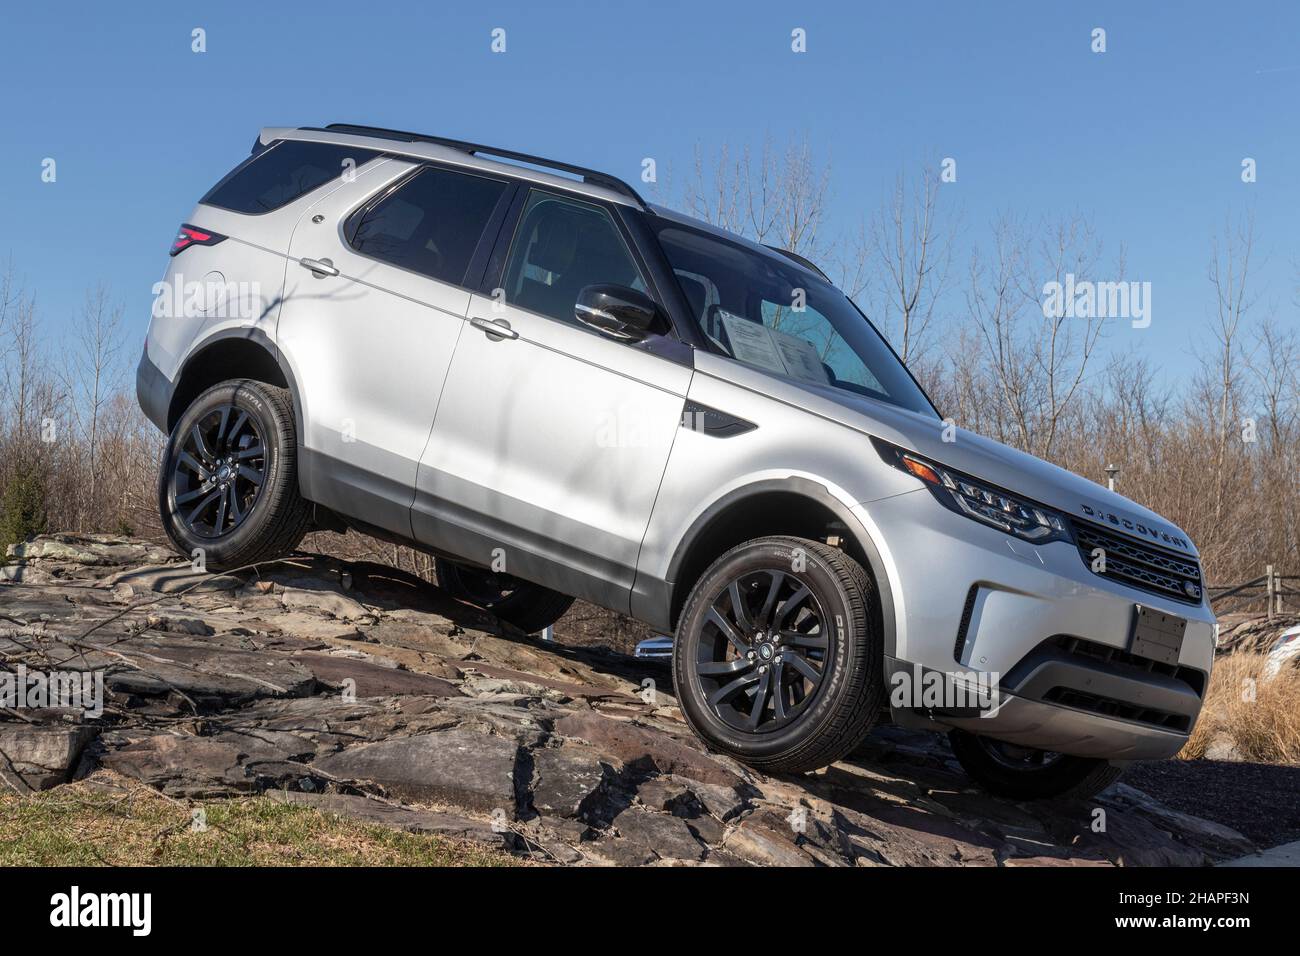 Indianapolis - Circa December 2021: Land Rover Discovery off road display. Jaguar Land Rover is a subsidiary of Tata Motors. Stock Photo